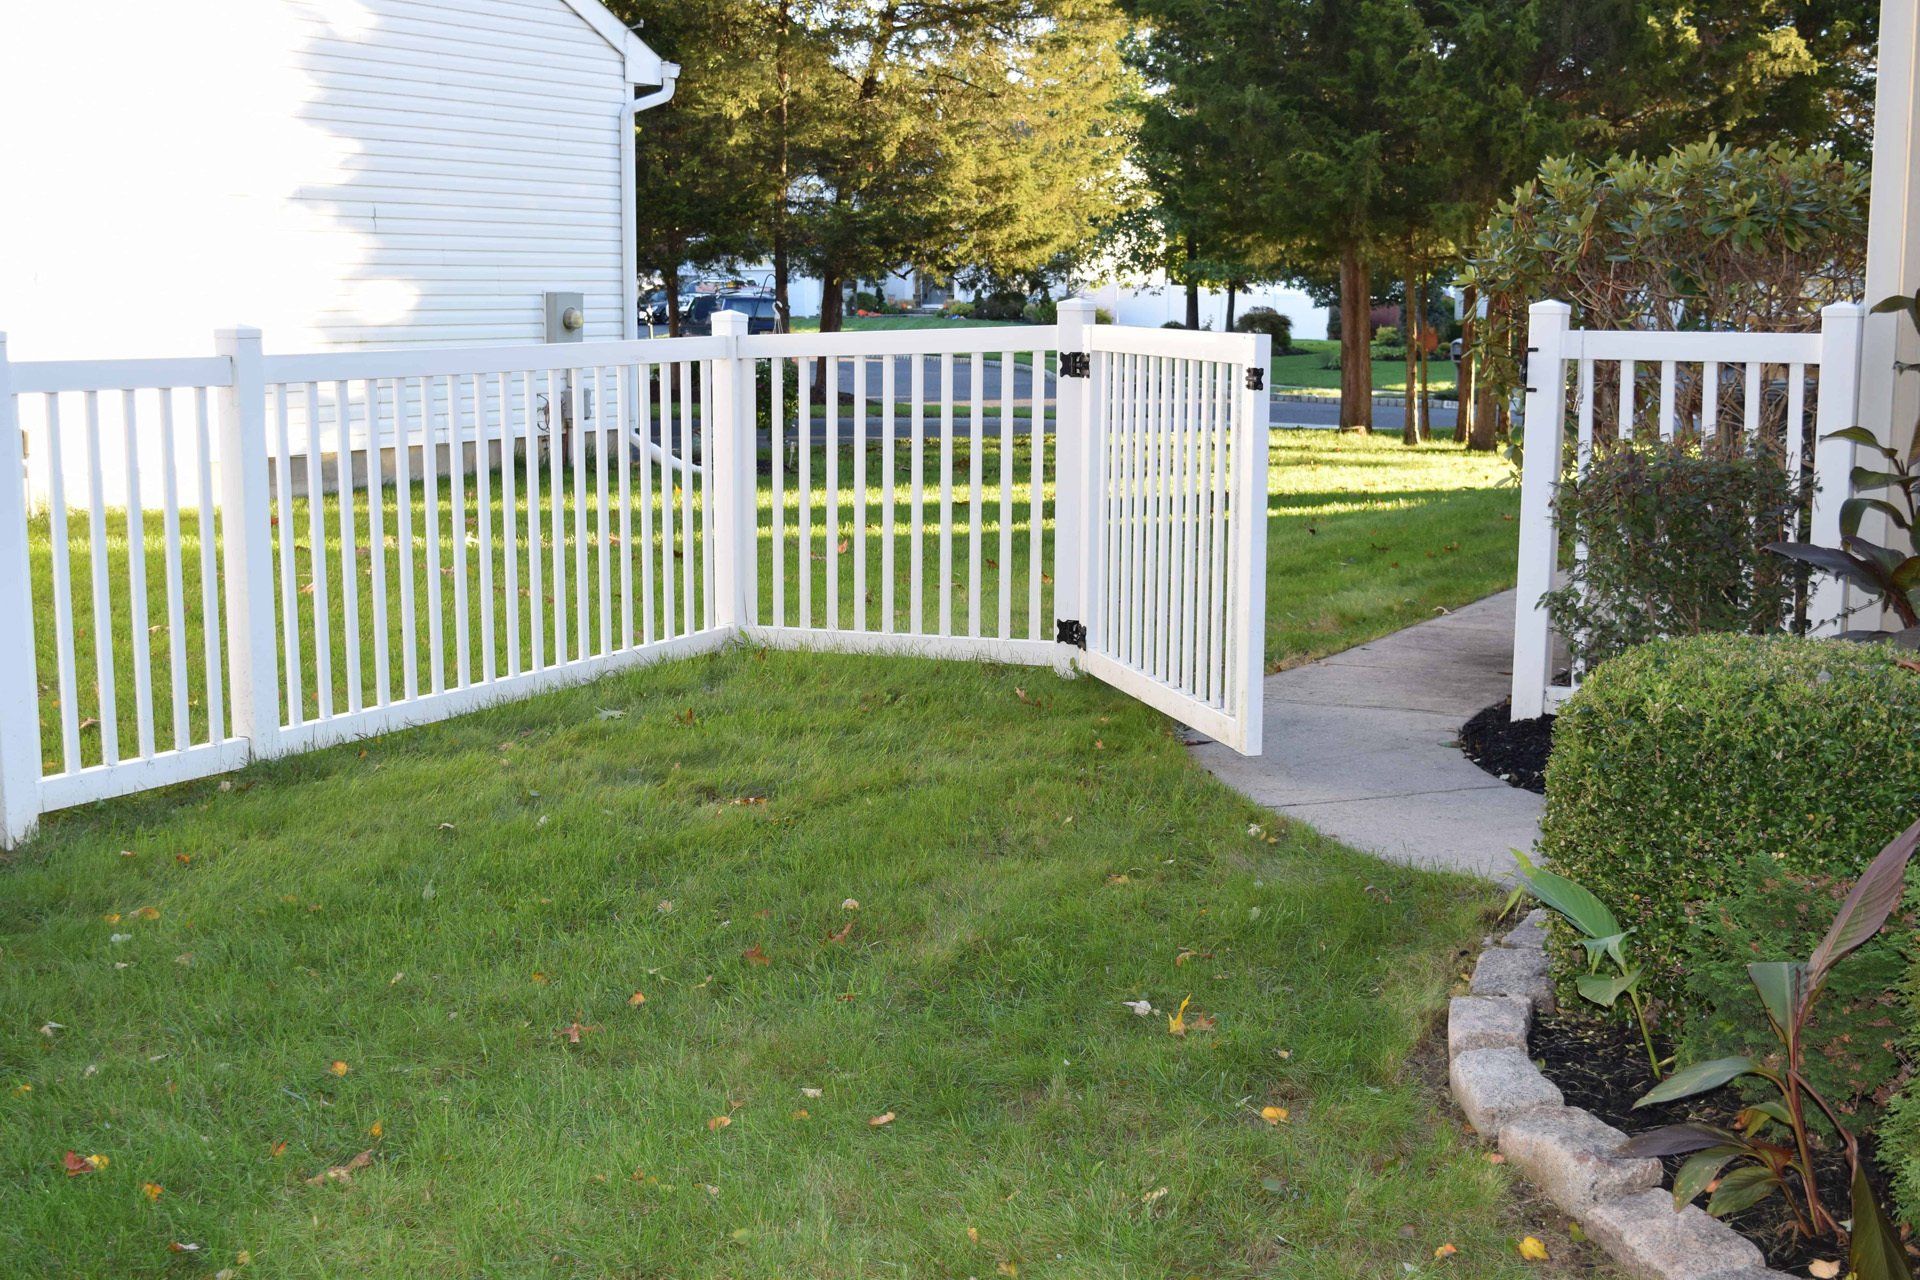 Vinyl fence is a top decorative fencing solution